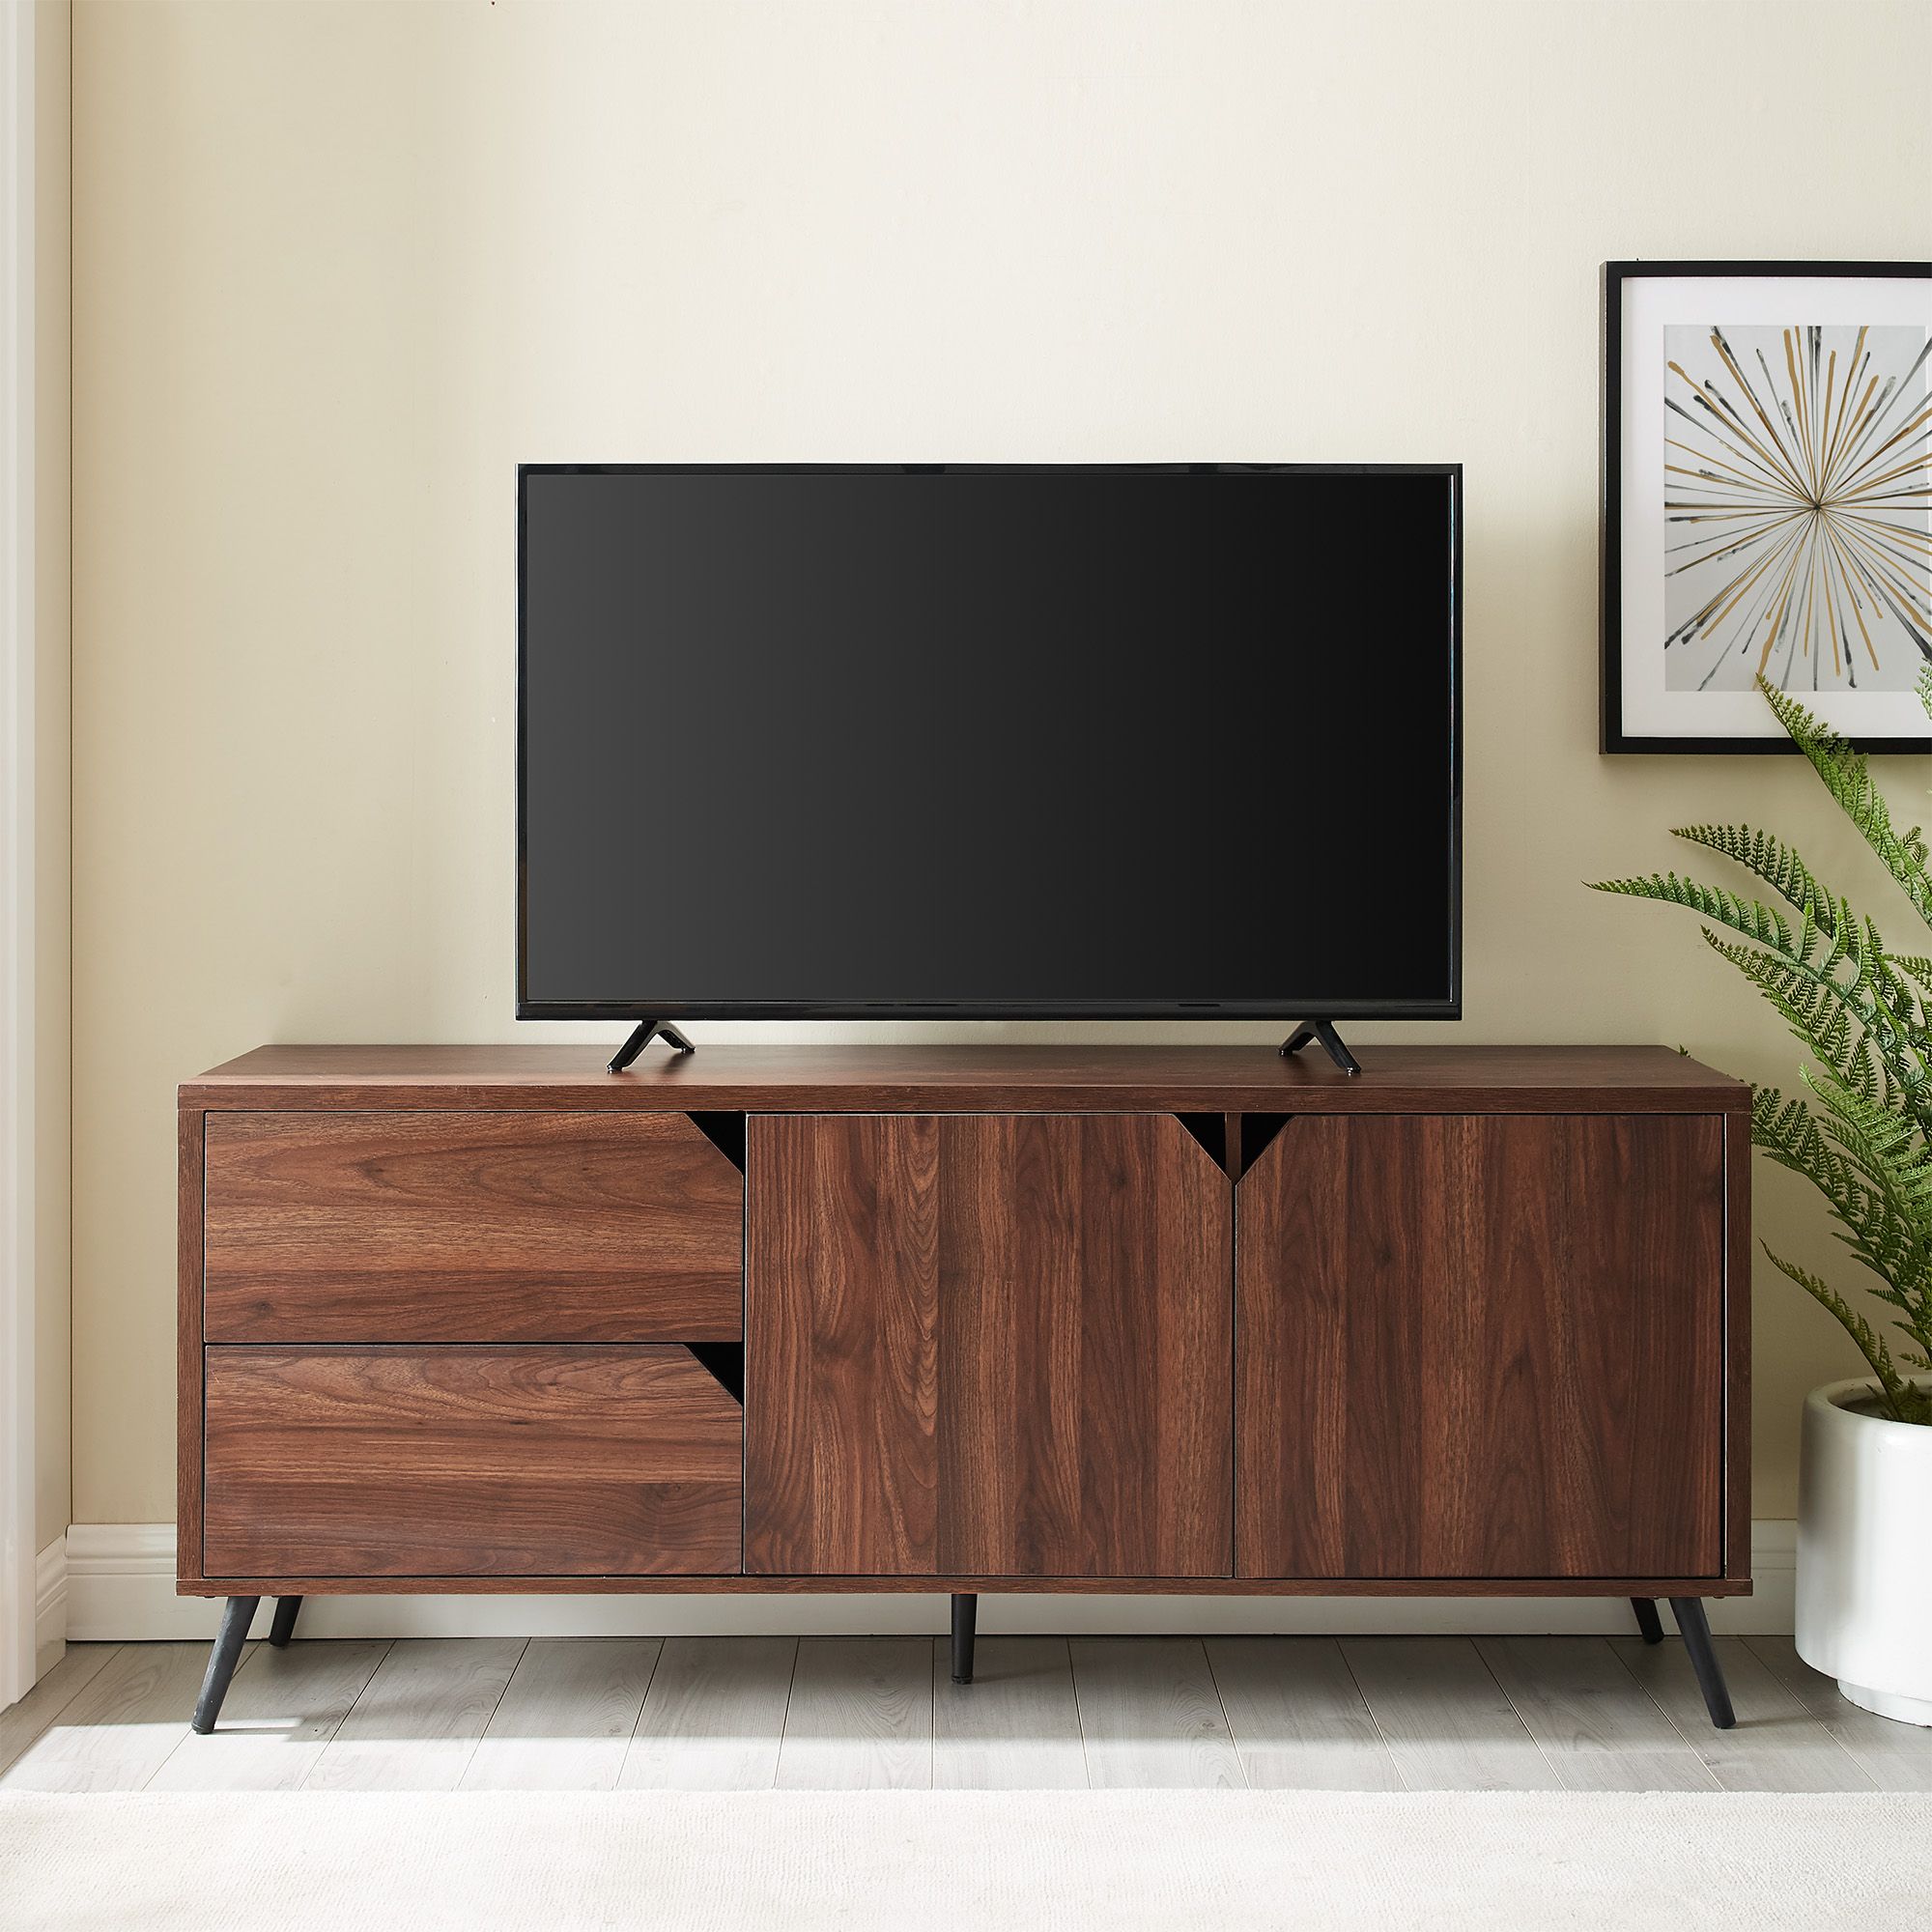 Manor Park Mid Century Tv Stand For Tvs Up To 65", Dark Pertaining To Tv Mount And Tv Stands For Tvs Up To 65" (View 10 of 15)